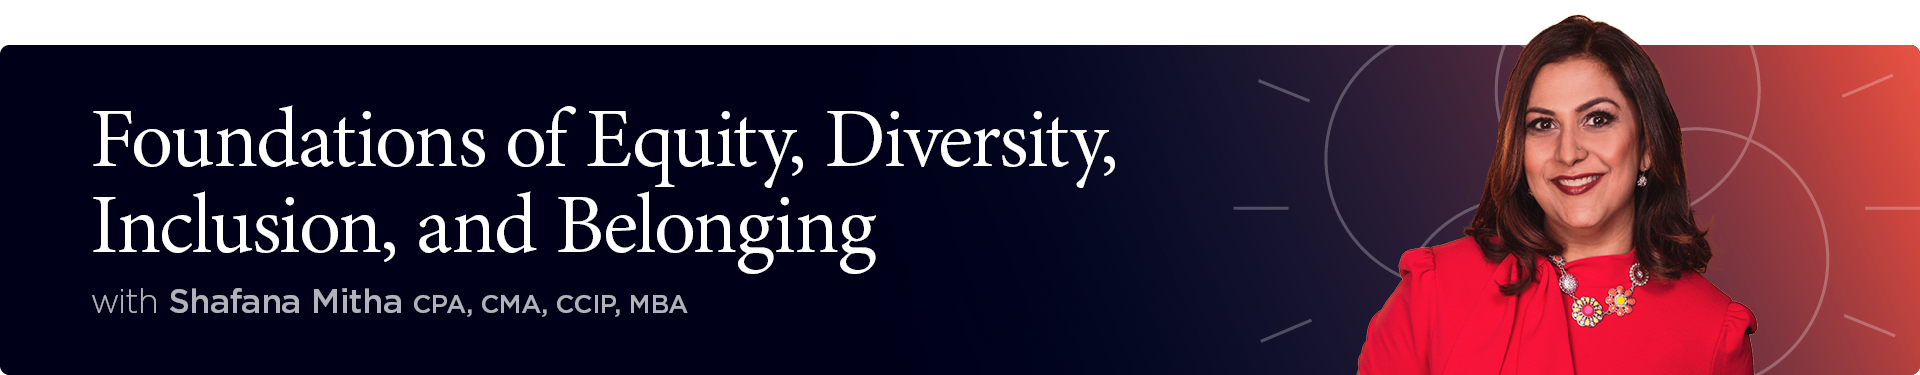 Foundations of Equity, Diversity, Inclusion, and Belonging